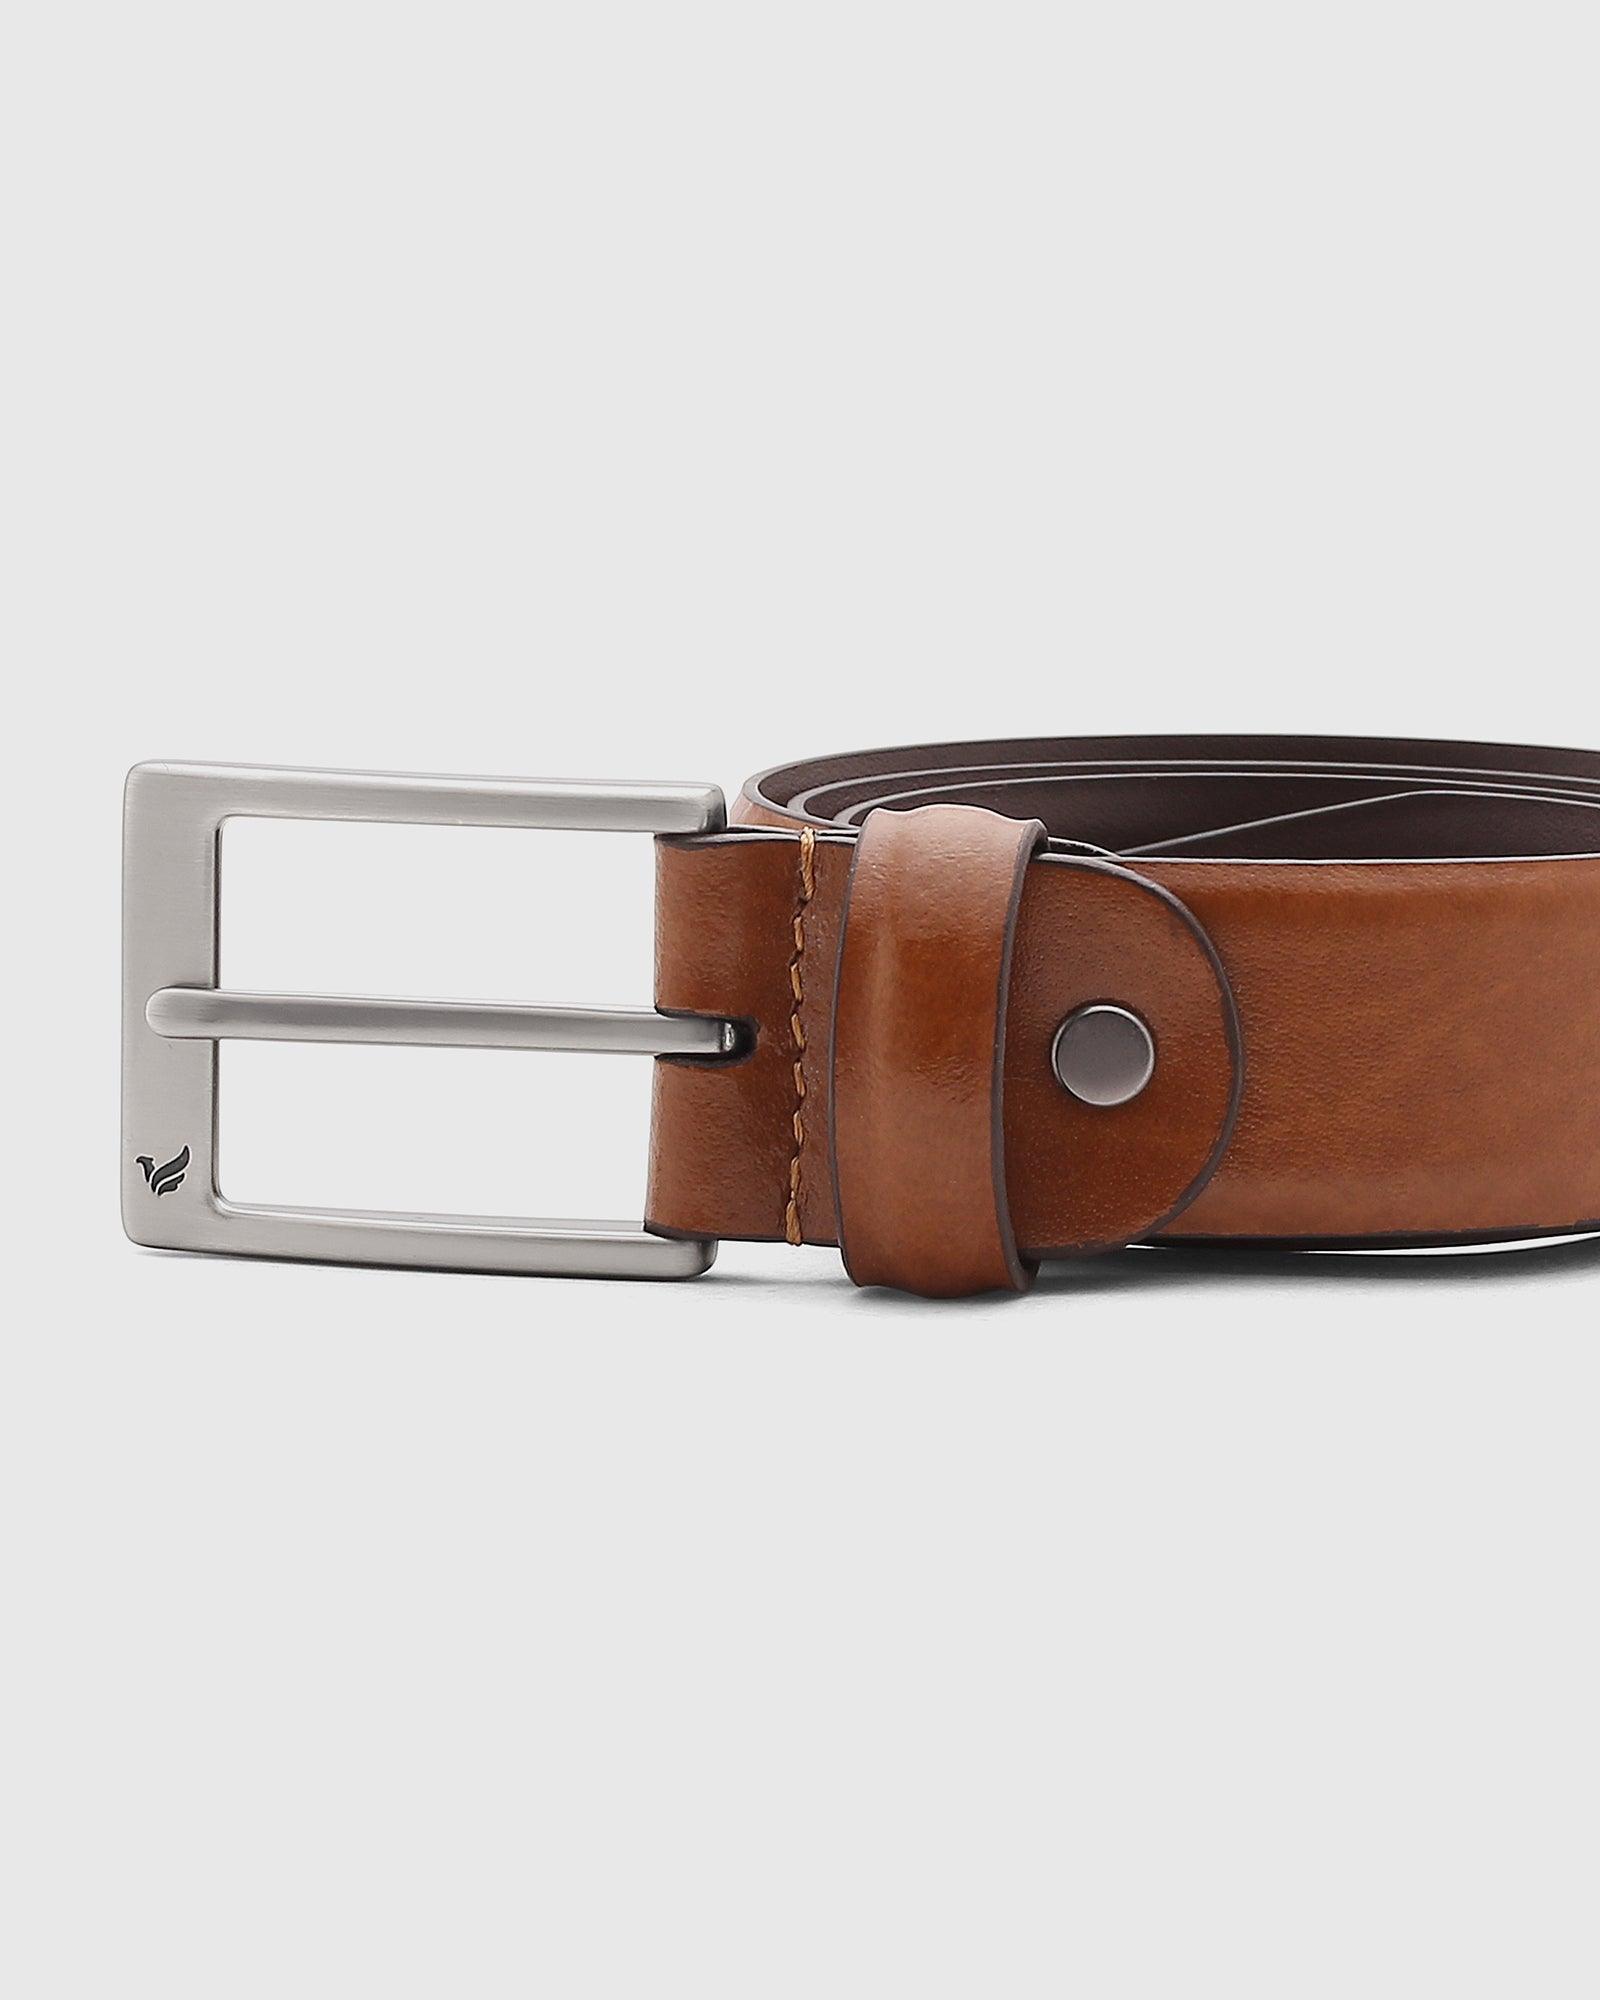 Leather Tan Solid Belt - Star